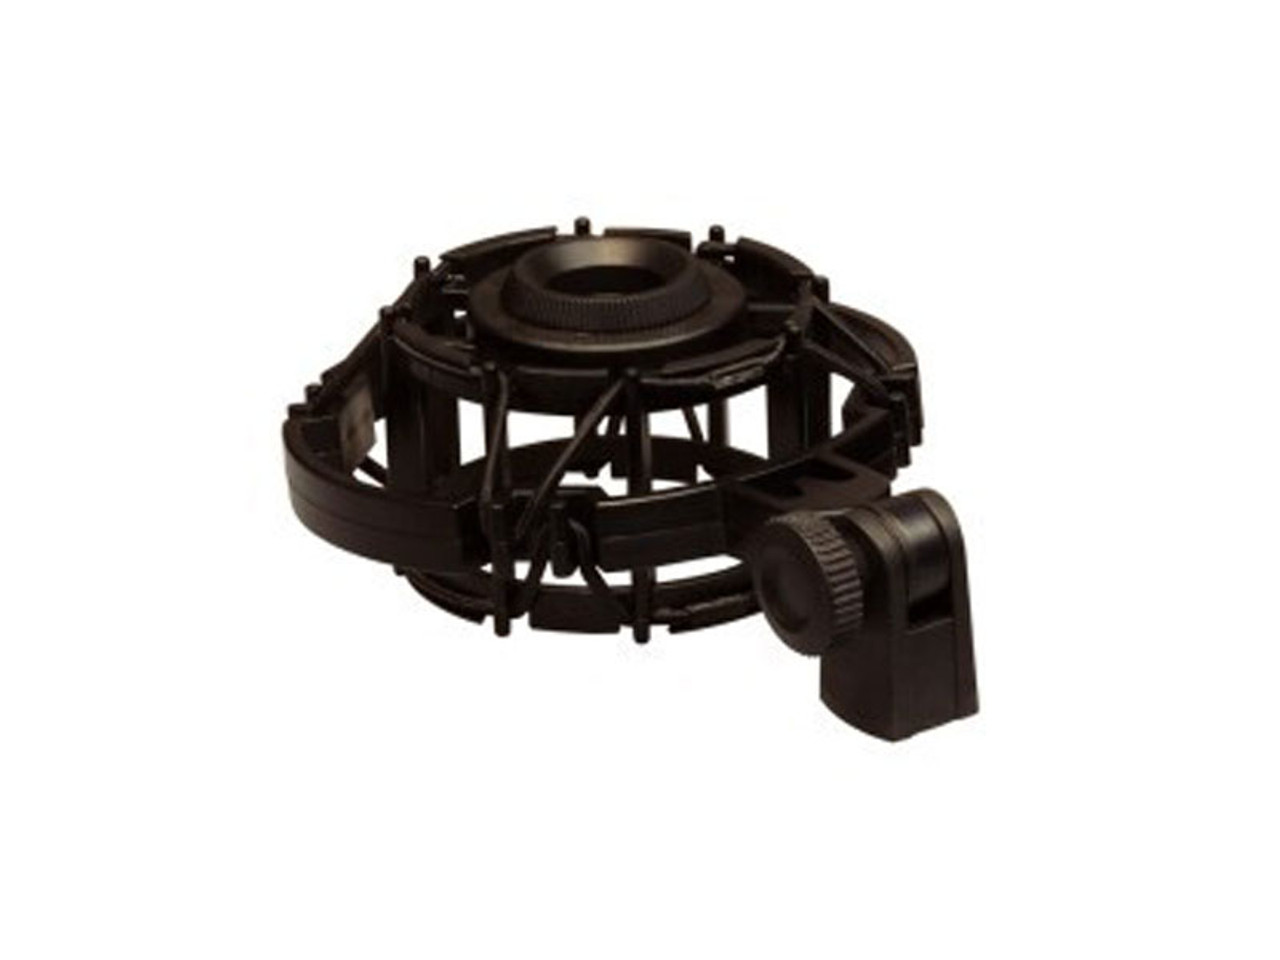 Avlex HM-26A Plastic Shock Mount For Broadcast and Studio Microphones